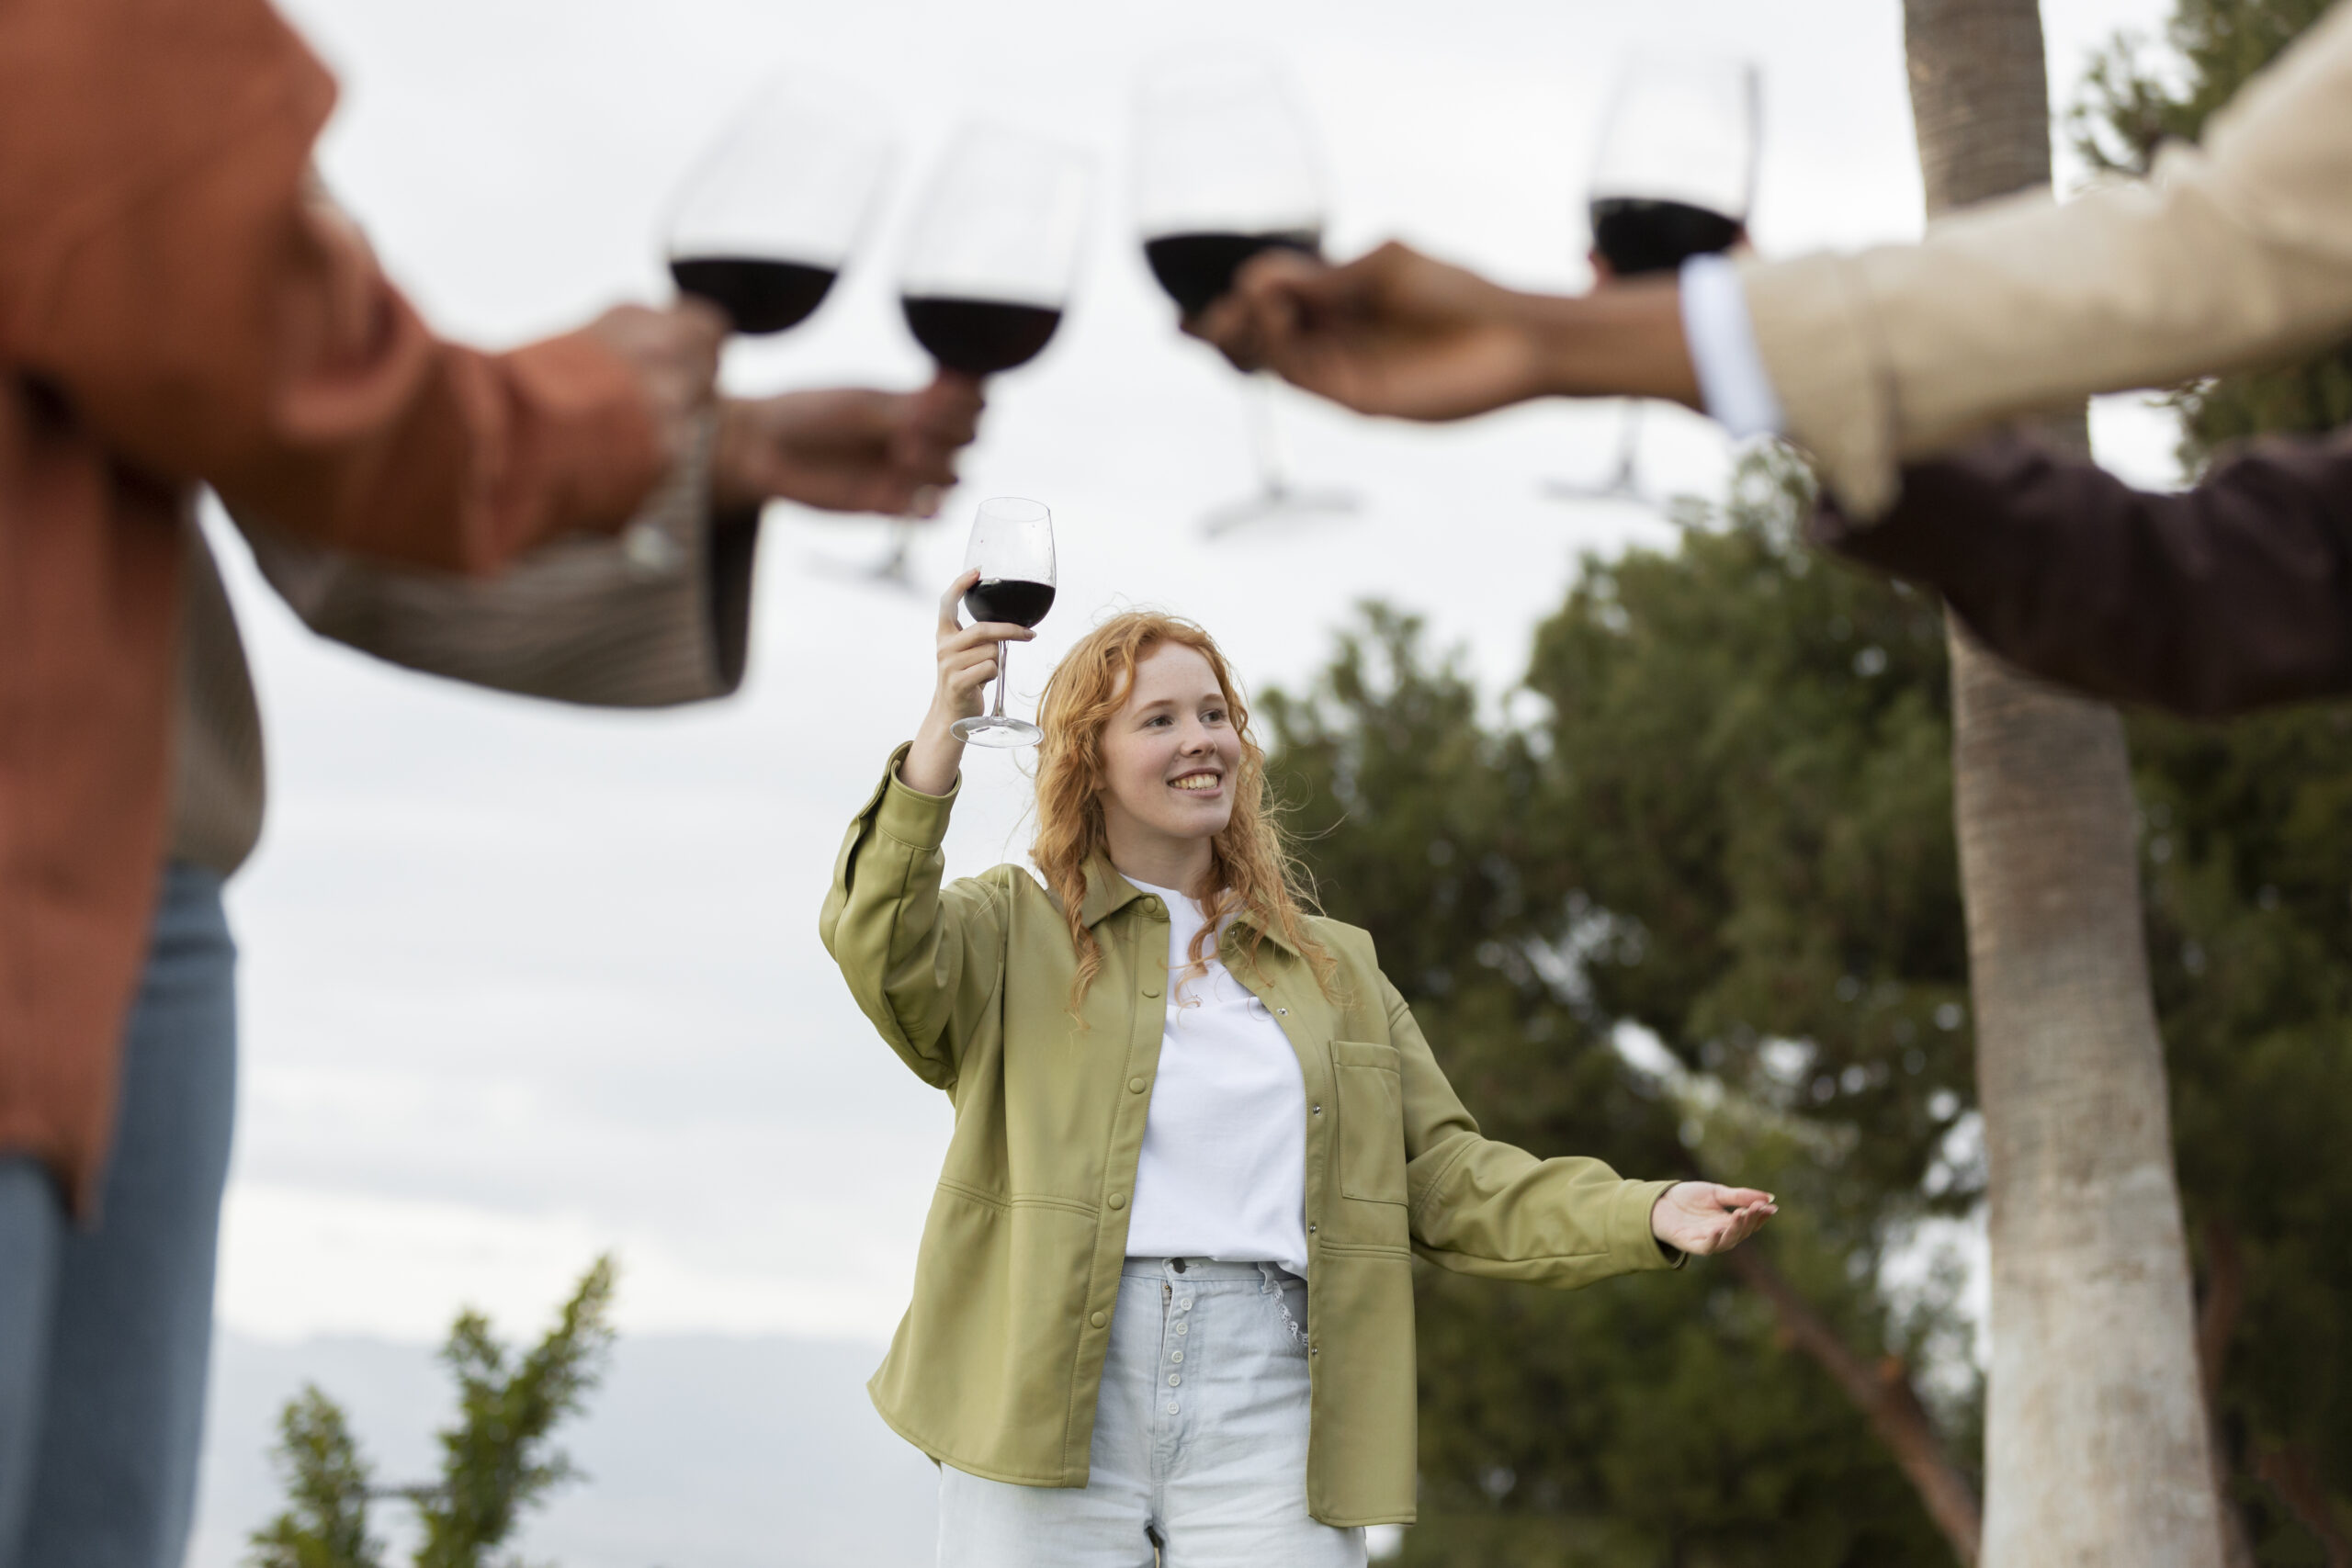 People enjoying themselves on a wine tour